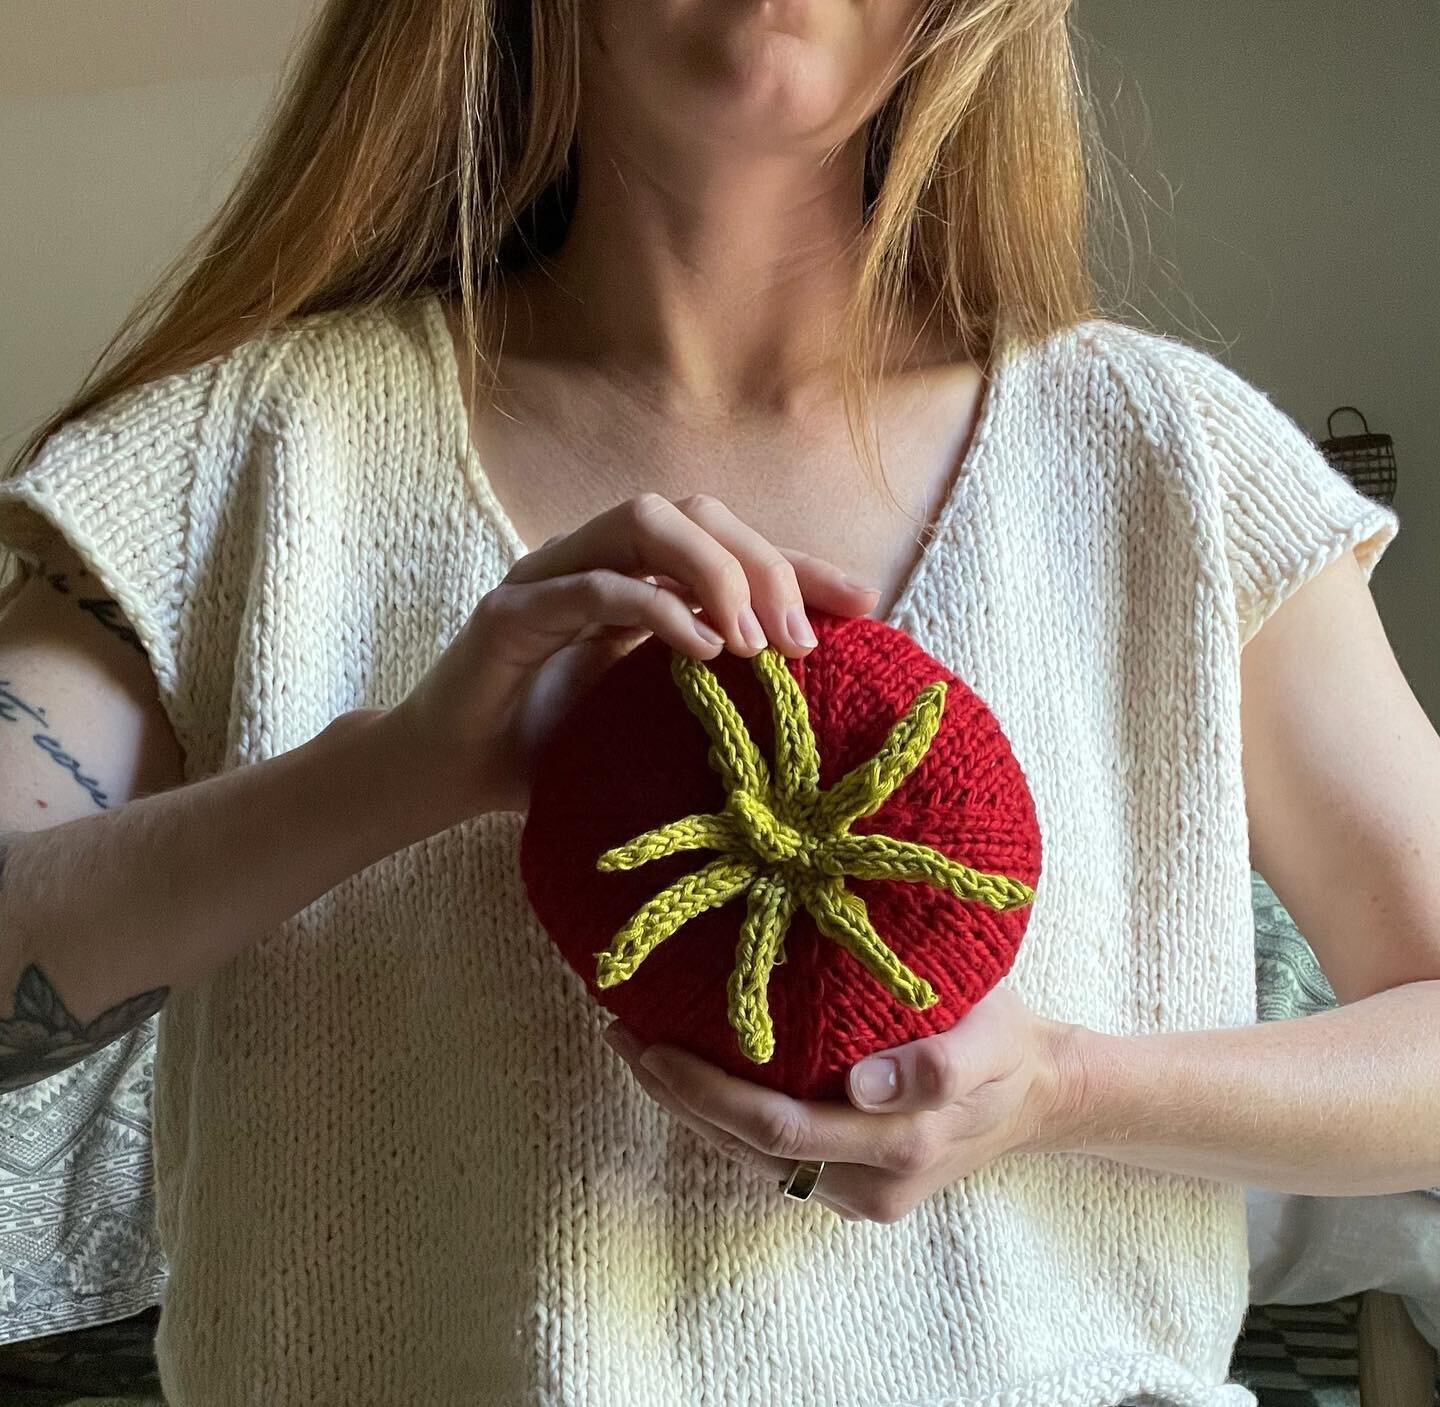 Calling all Tomato Girls&hellip;there&rsquo;s a new pattern announcement&hellip;It&rsquo;s a tomato 🍅 
.
A perfect on-the-side project addition to your Soft Summer KAL. 
.
Patreon members get this fresh from the vine pattern for free ✨ 
.
Wearing th